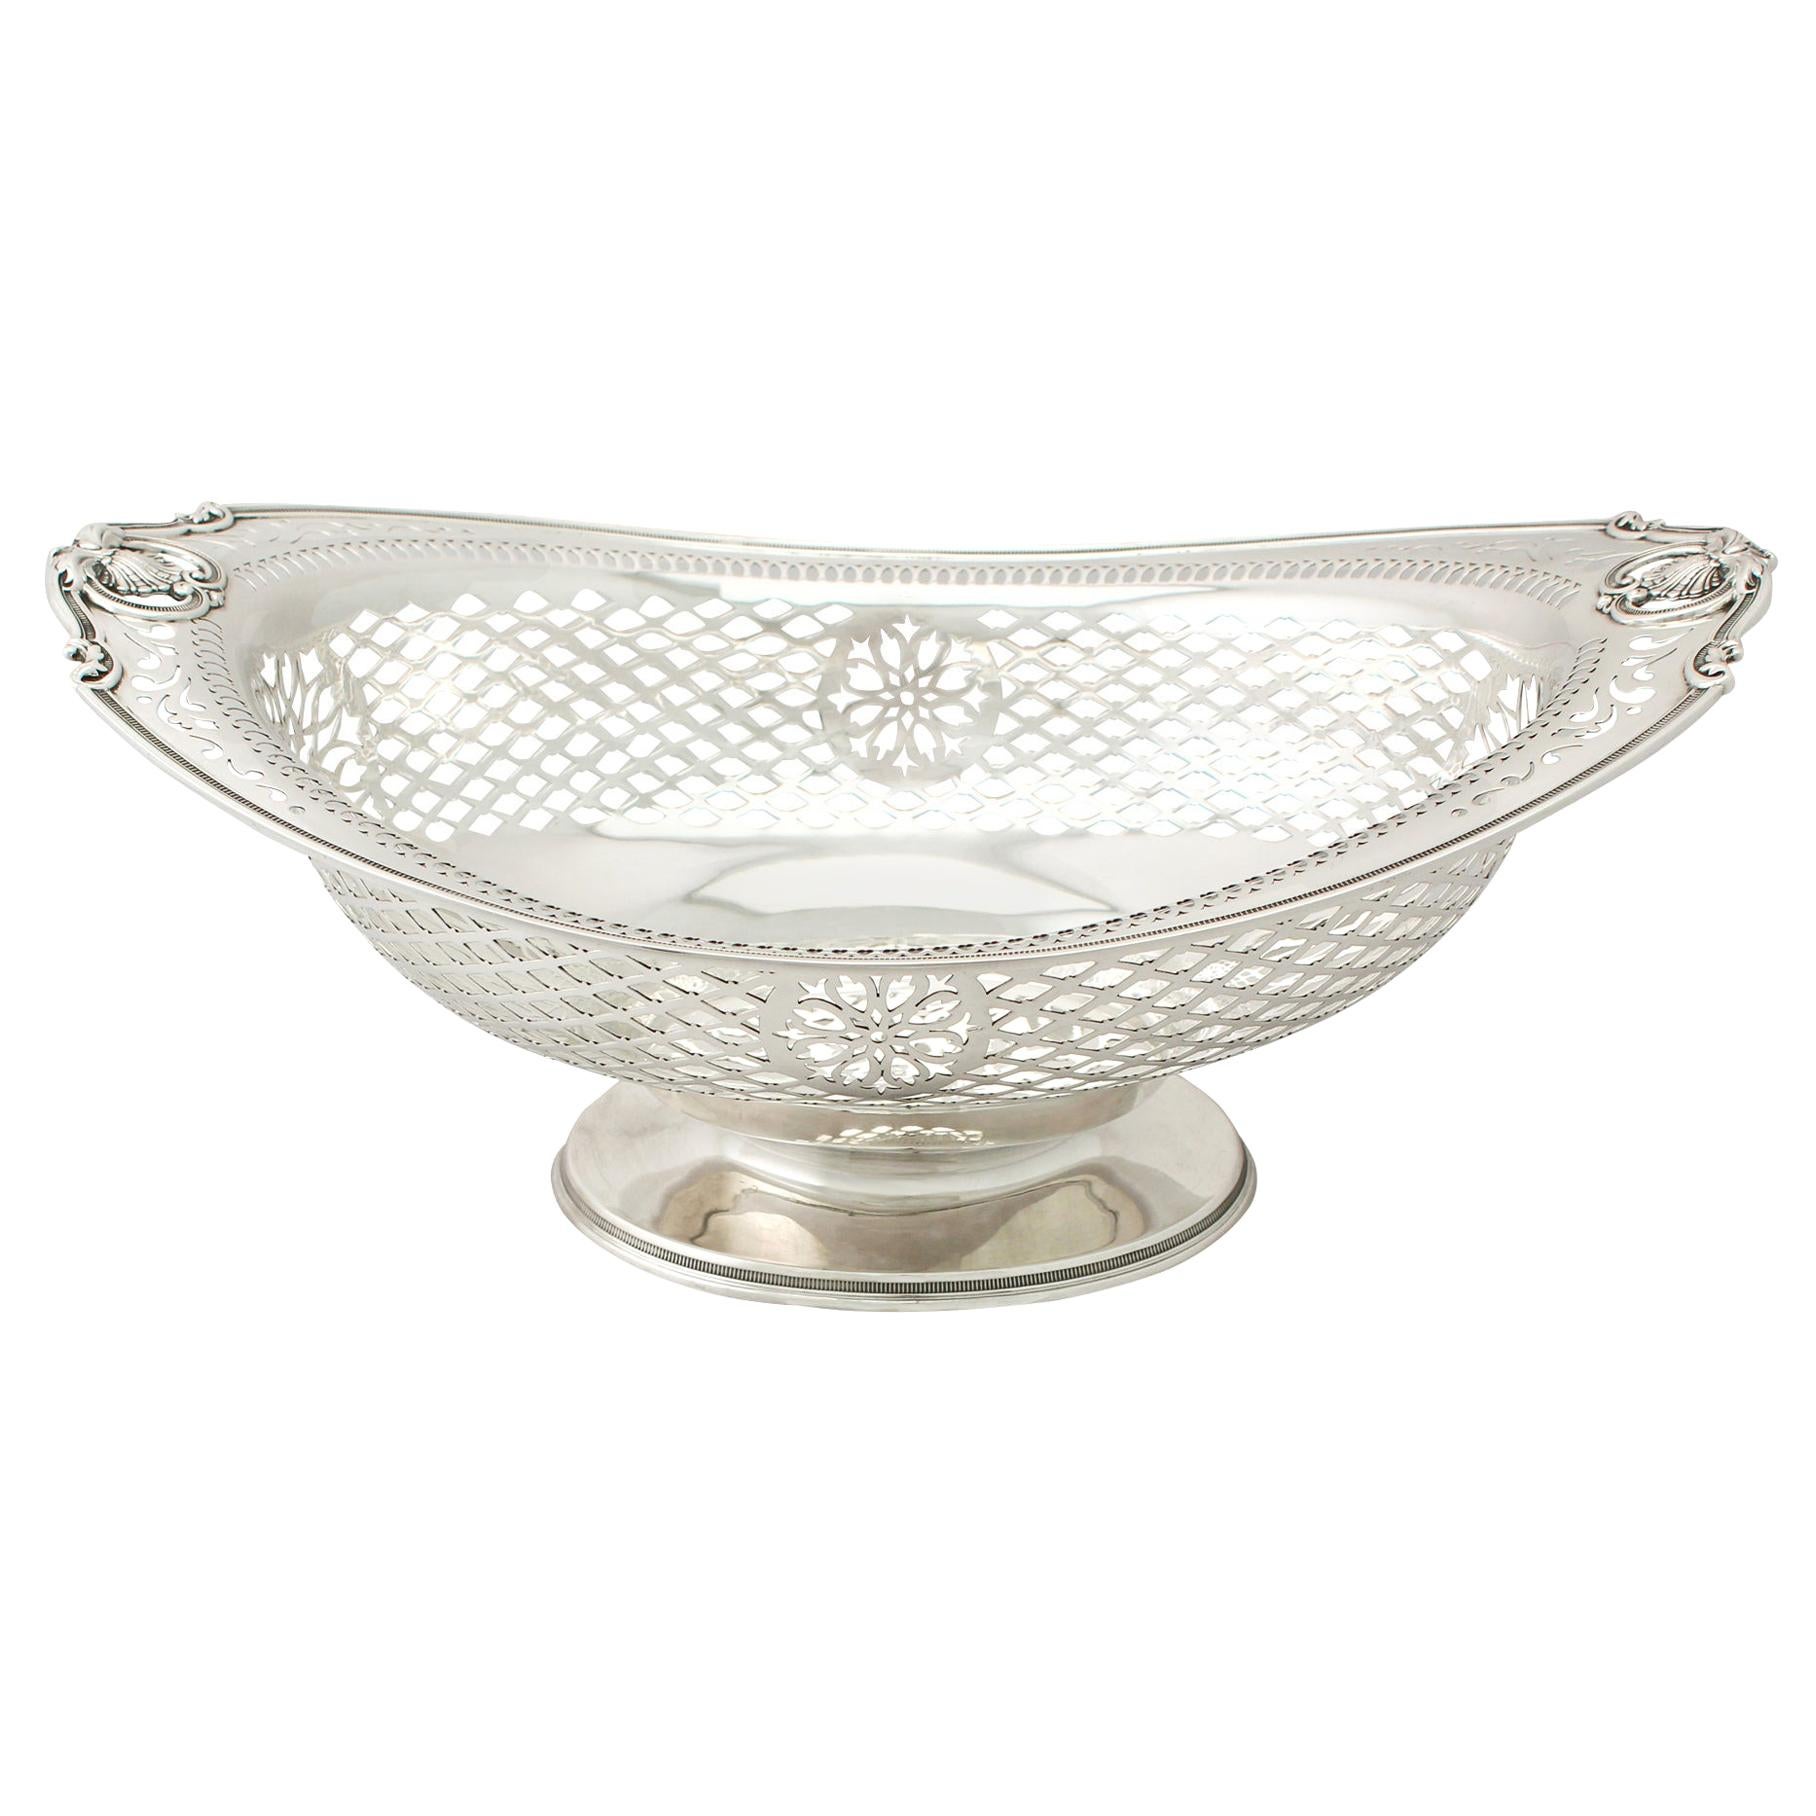 20th Century Vintage American Sterling Silver Fruit Bowl, 1945